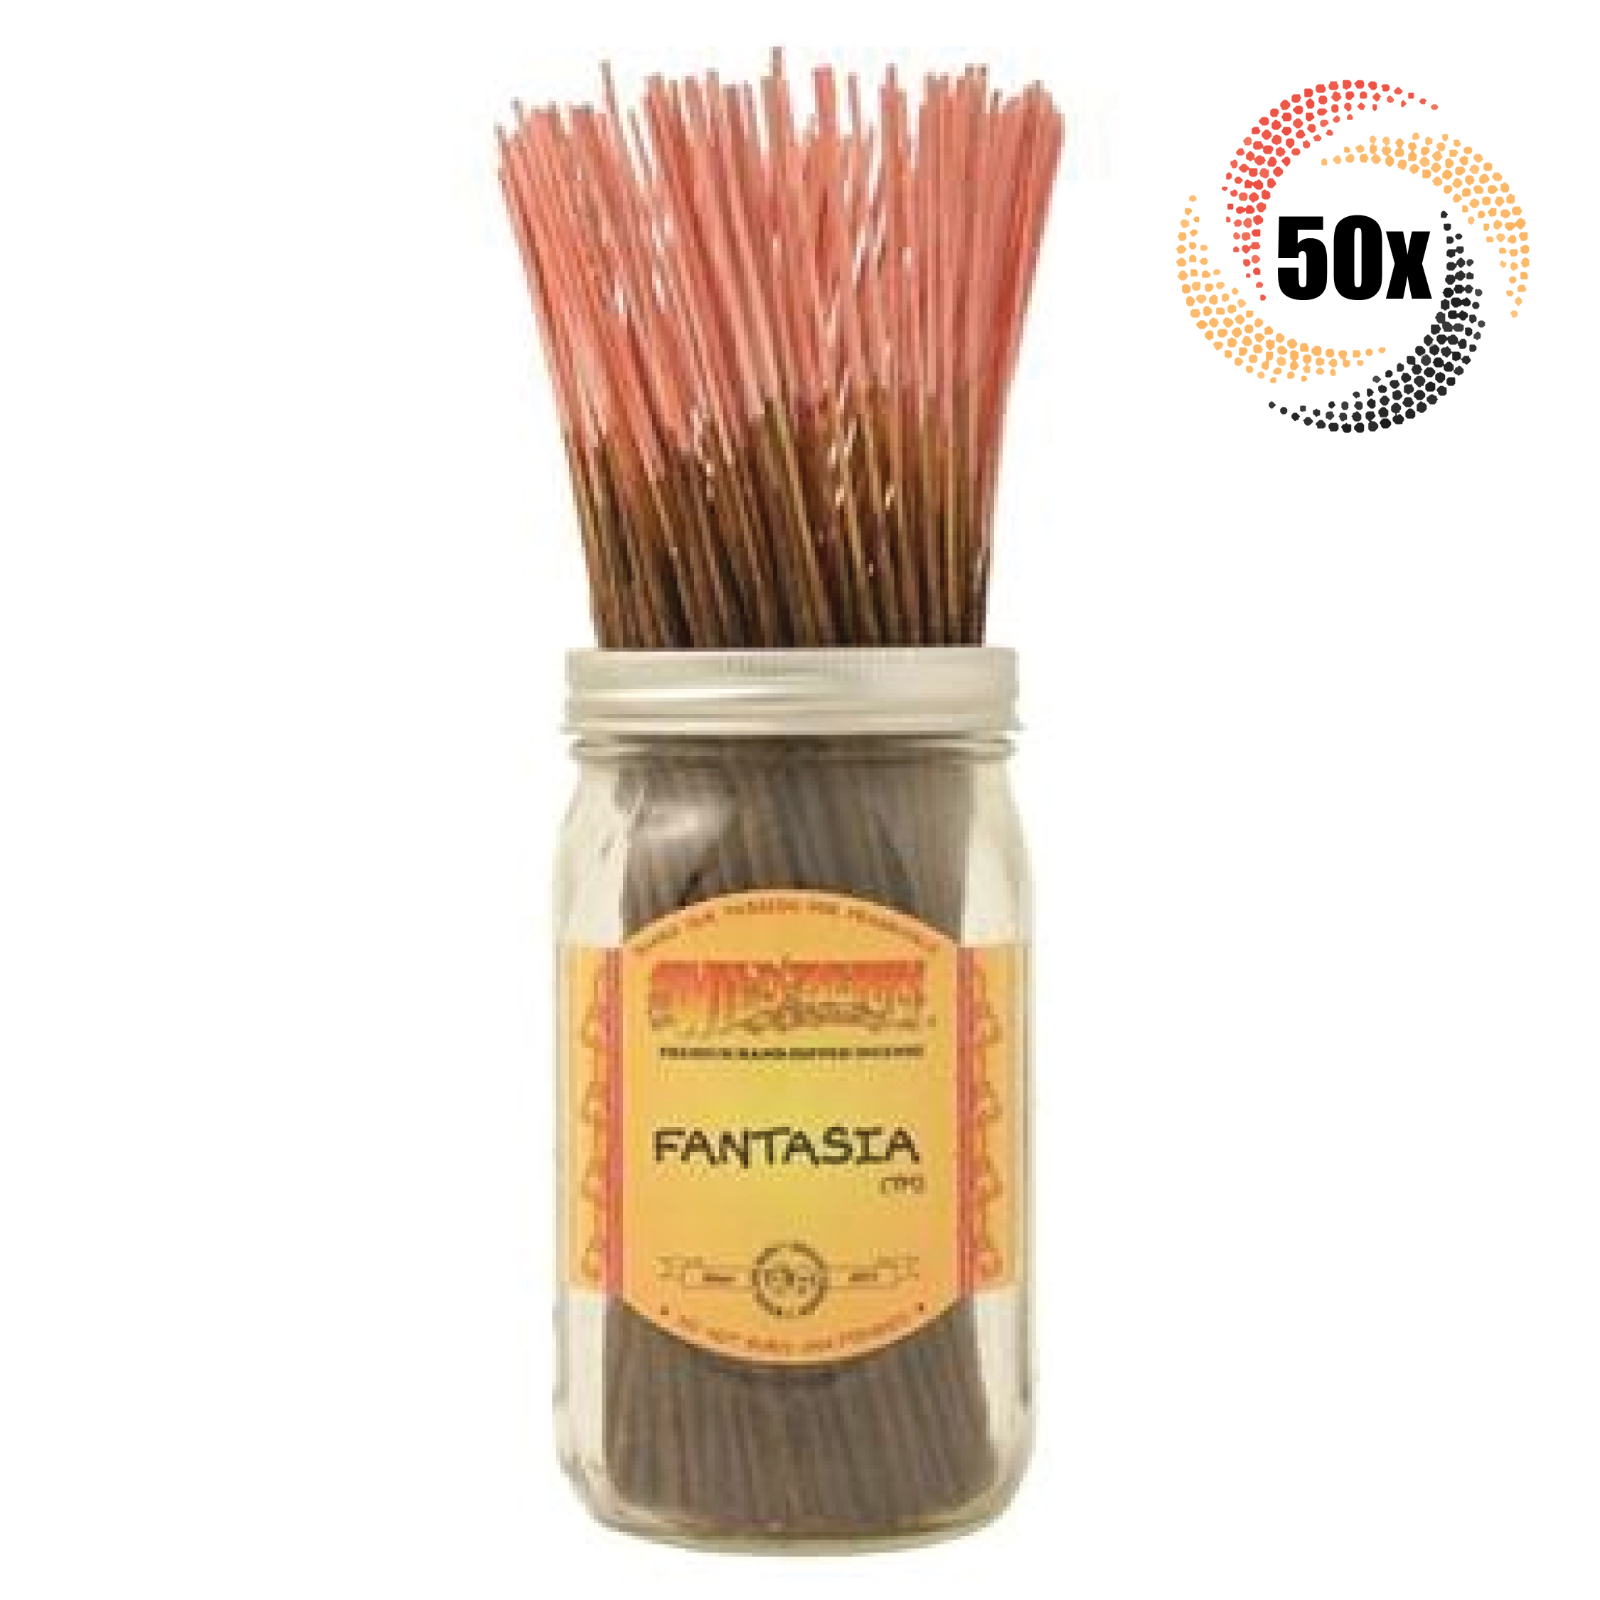 Primary image for 50x Wild Berry Fantasia Incense Sticks ( 50 Sticks ) Wildberry Fast Shipping!